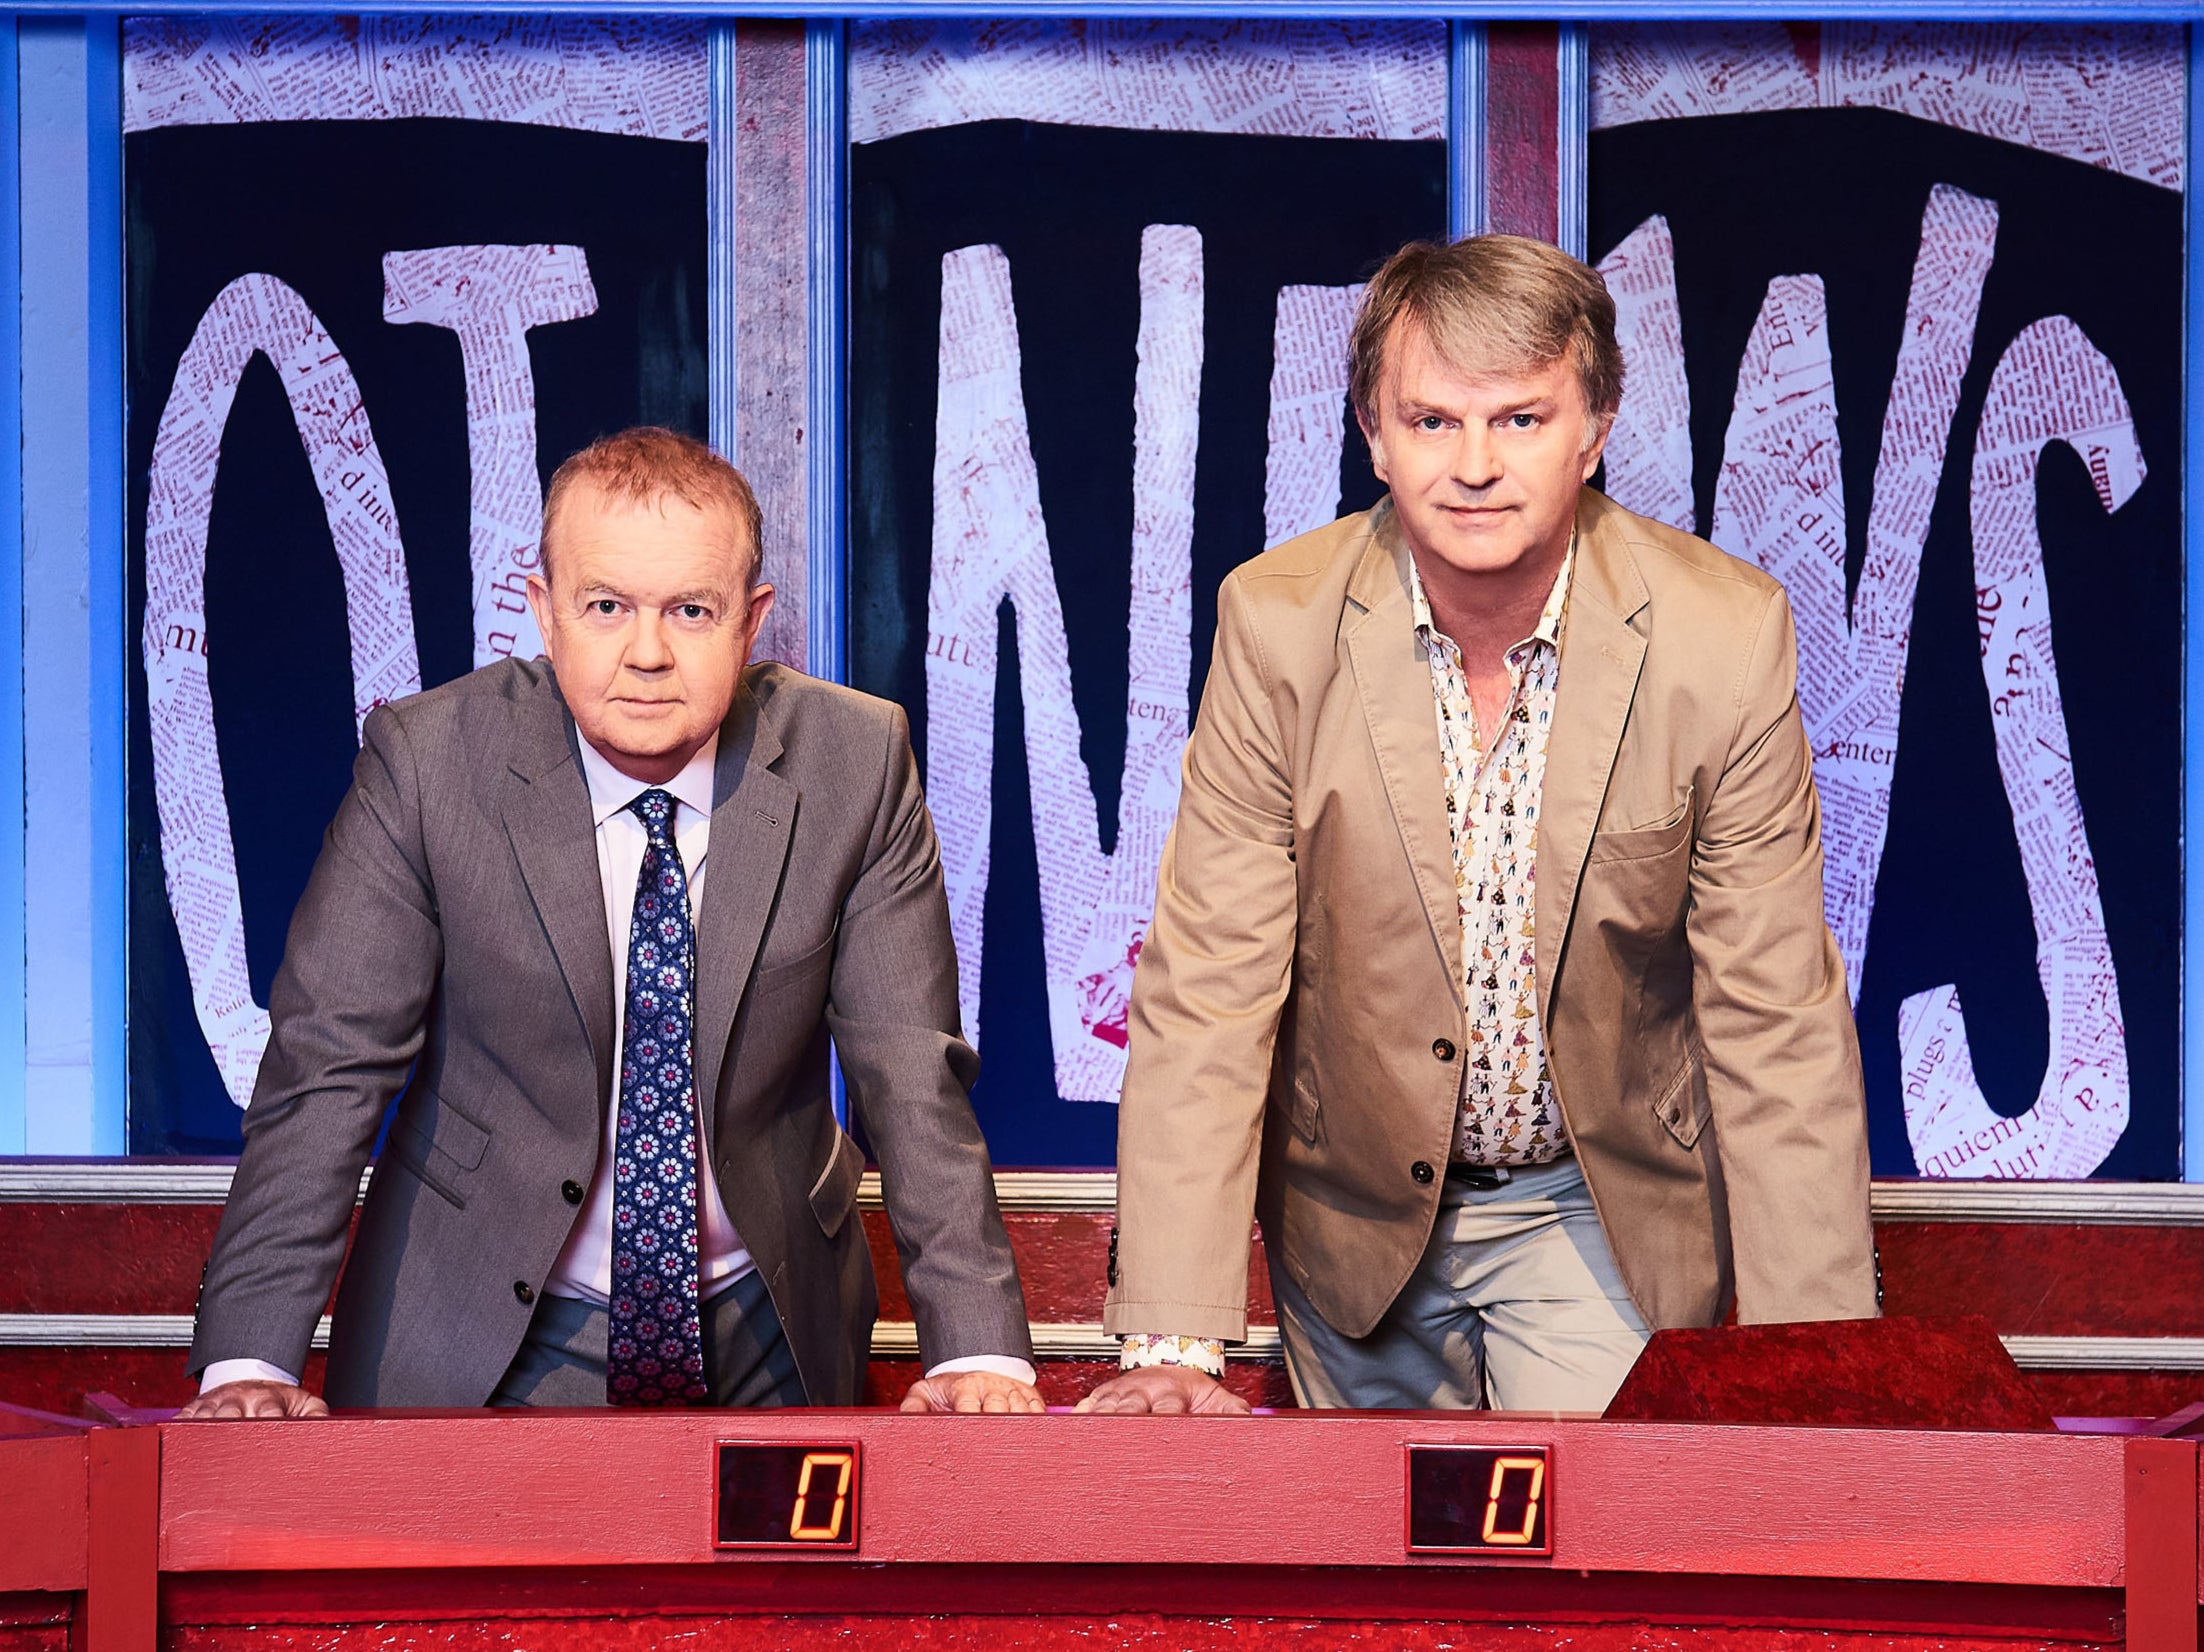 Ian Hislop and Paul Merton, stars of the venerable TV panel show ‘Have I Got News For You’